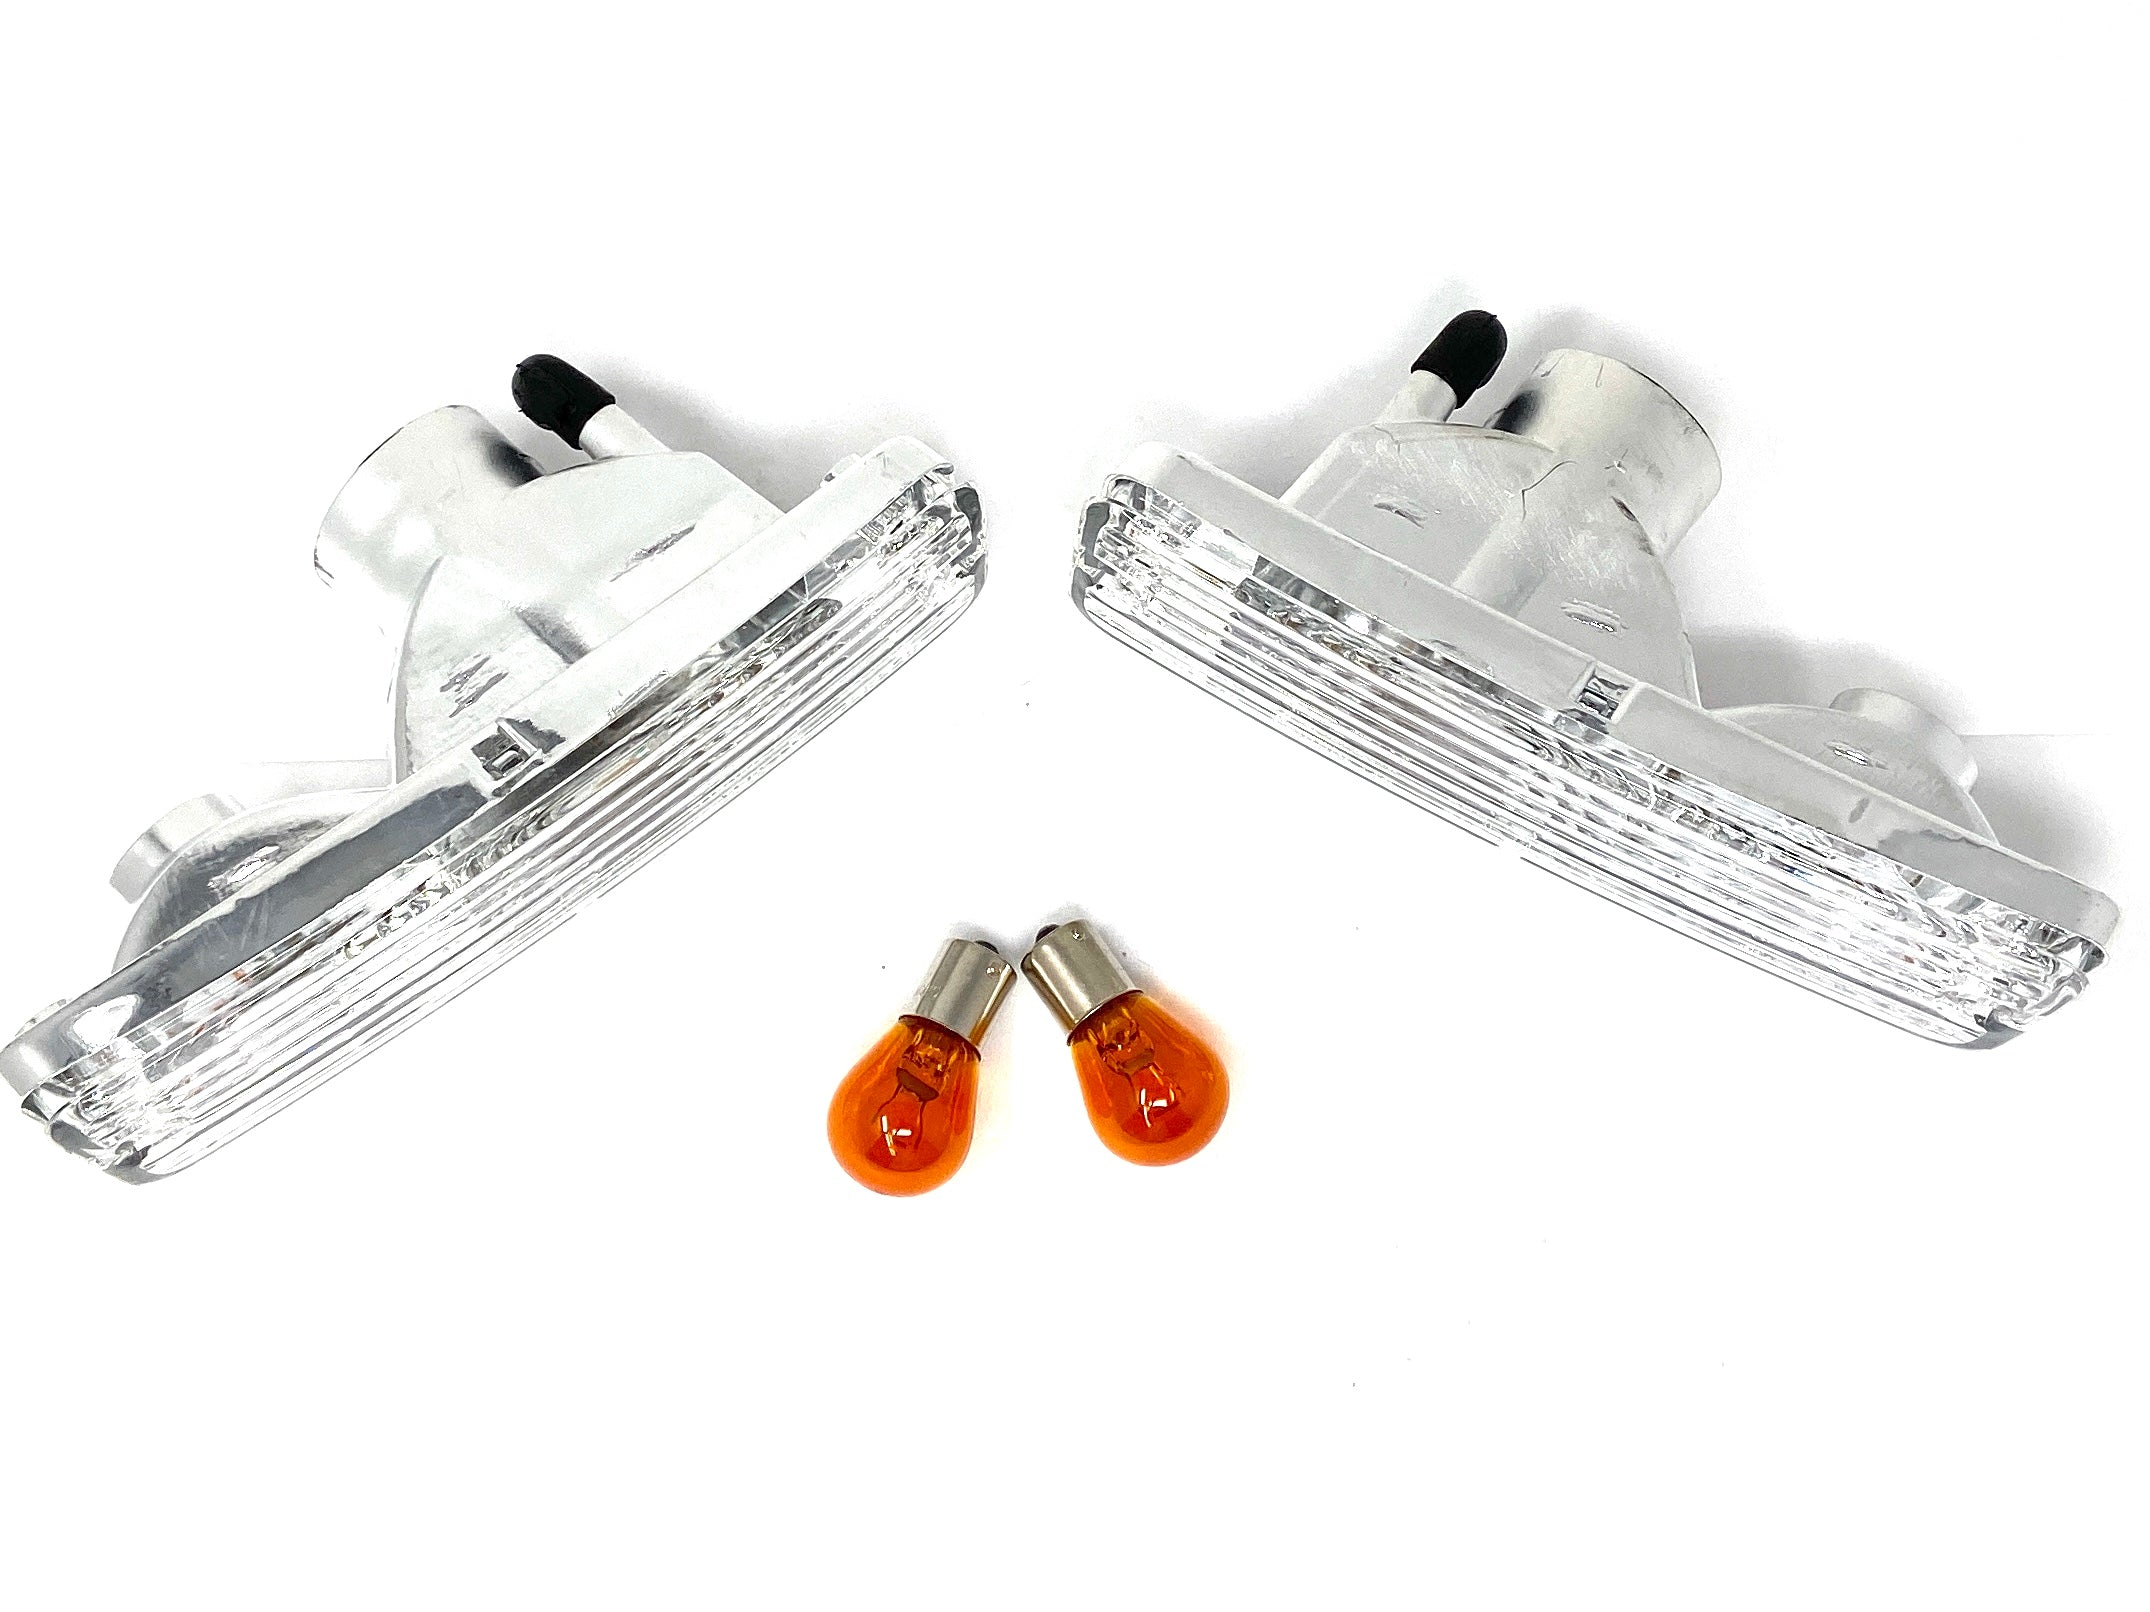 Front Crystal Clear Turn Signal Lights Nissan S13 180SX Zenki Dual